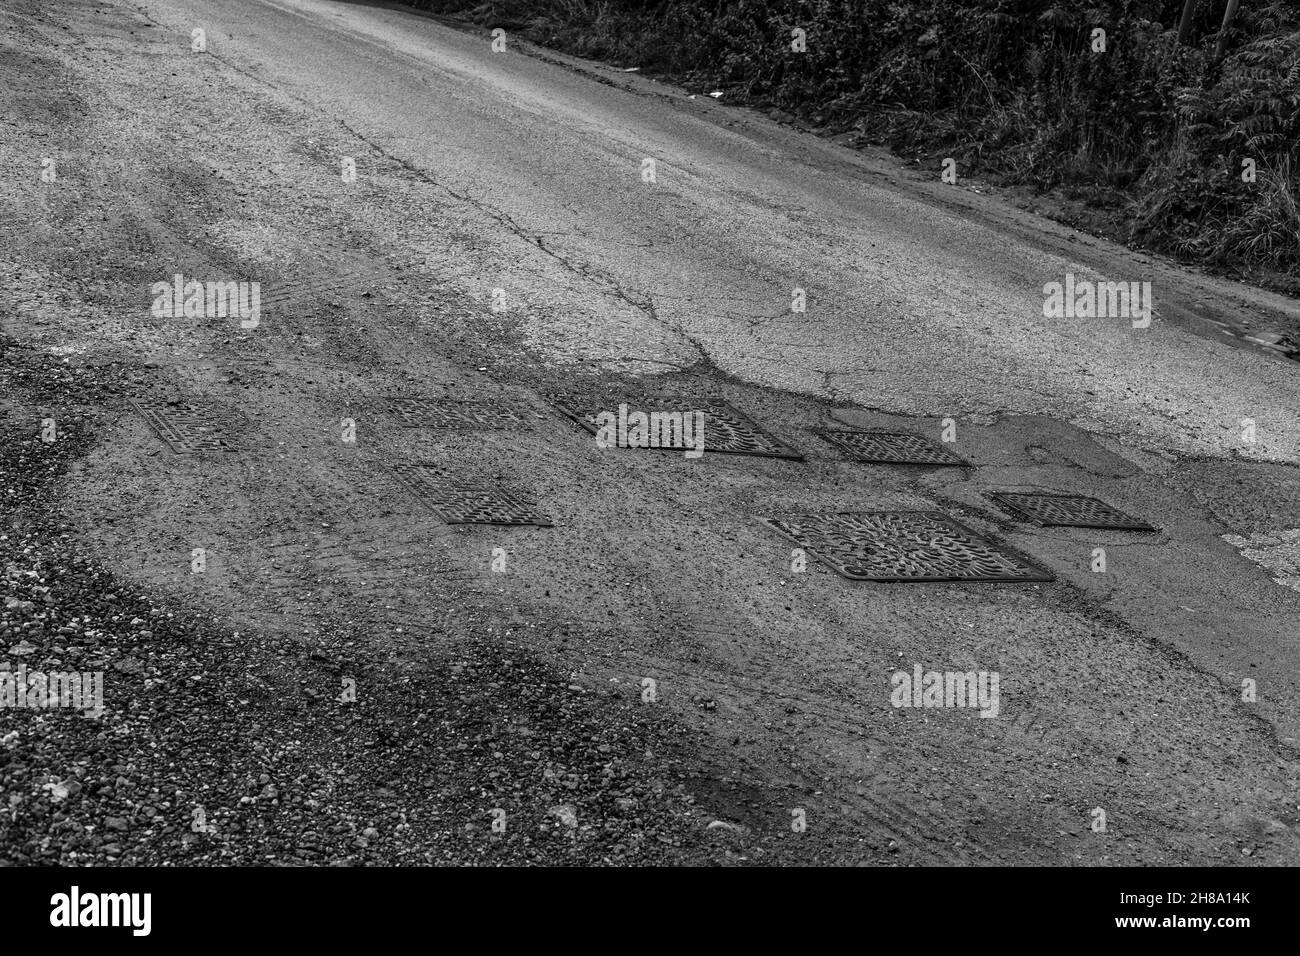 Manhole covers on a unkept road. Stock Photo